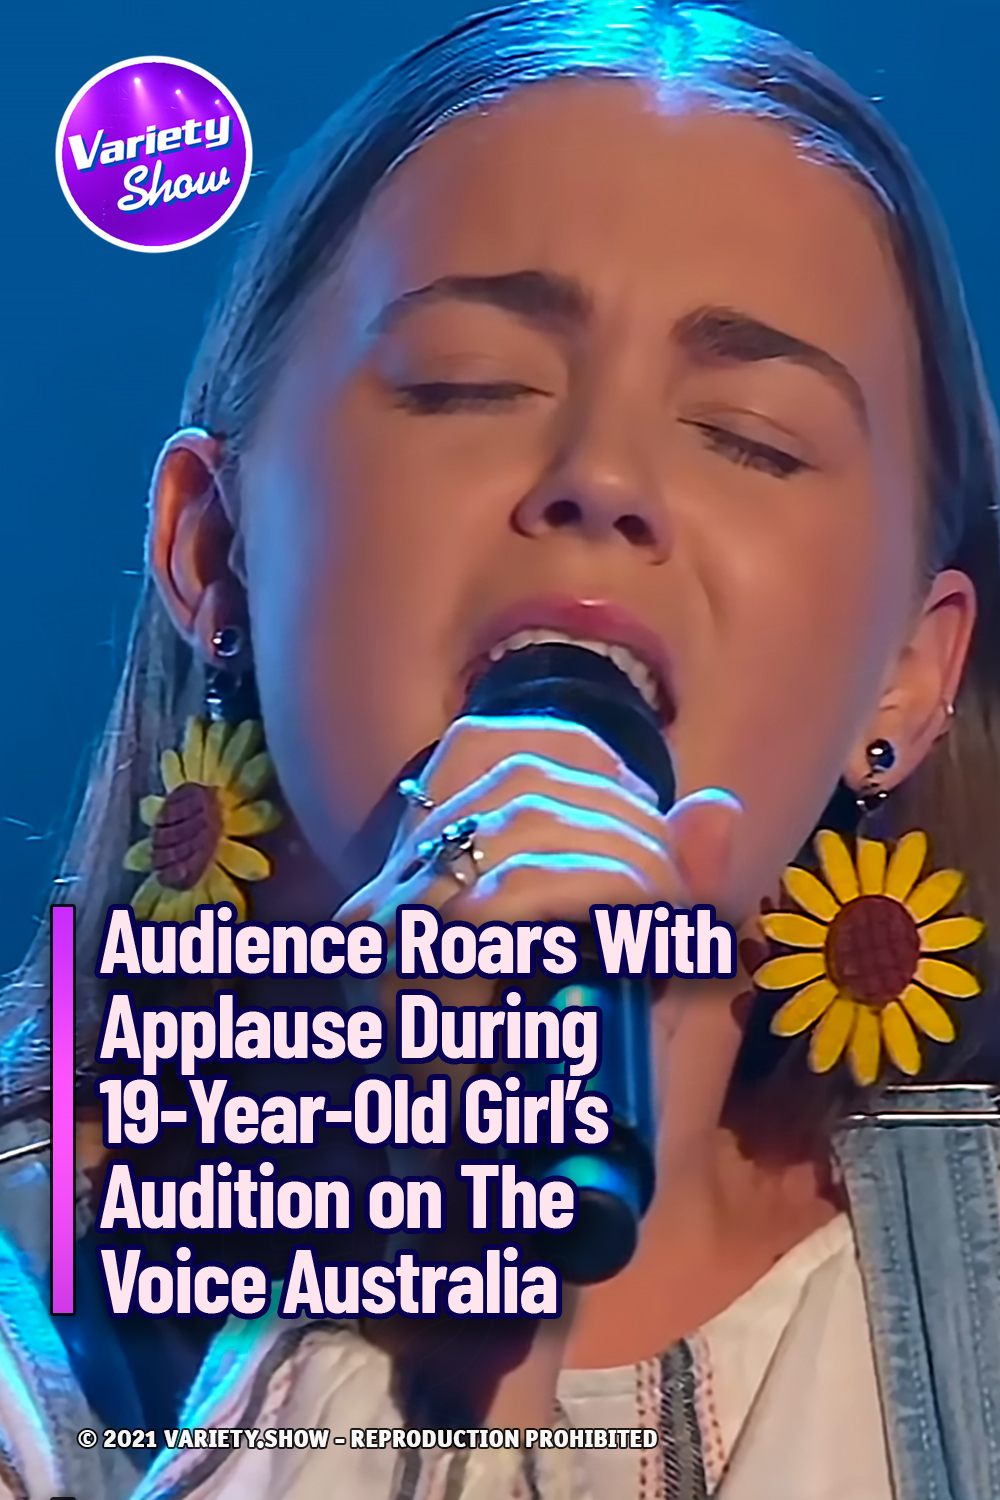 Audience Roars With Applause During 19-Year-Old Girl’s Audition on The Voice Australia